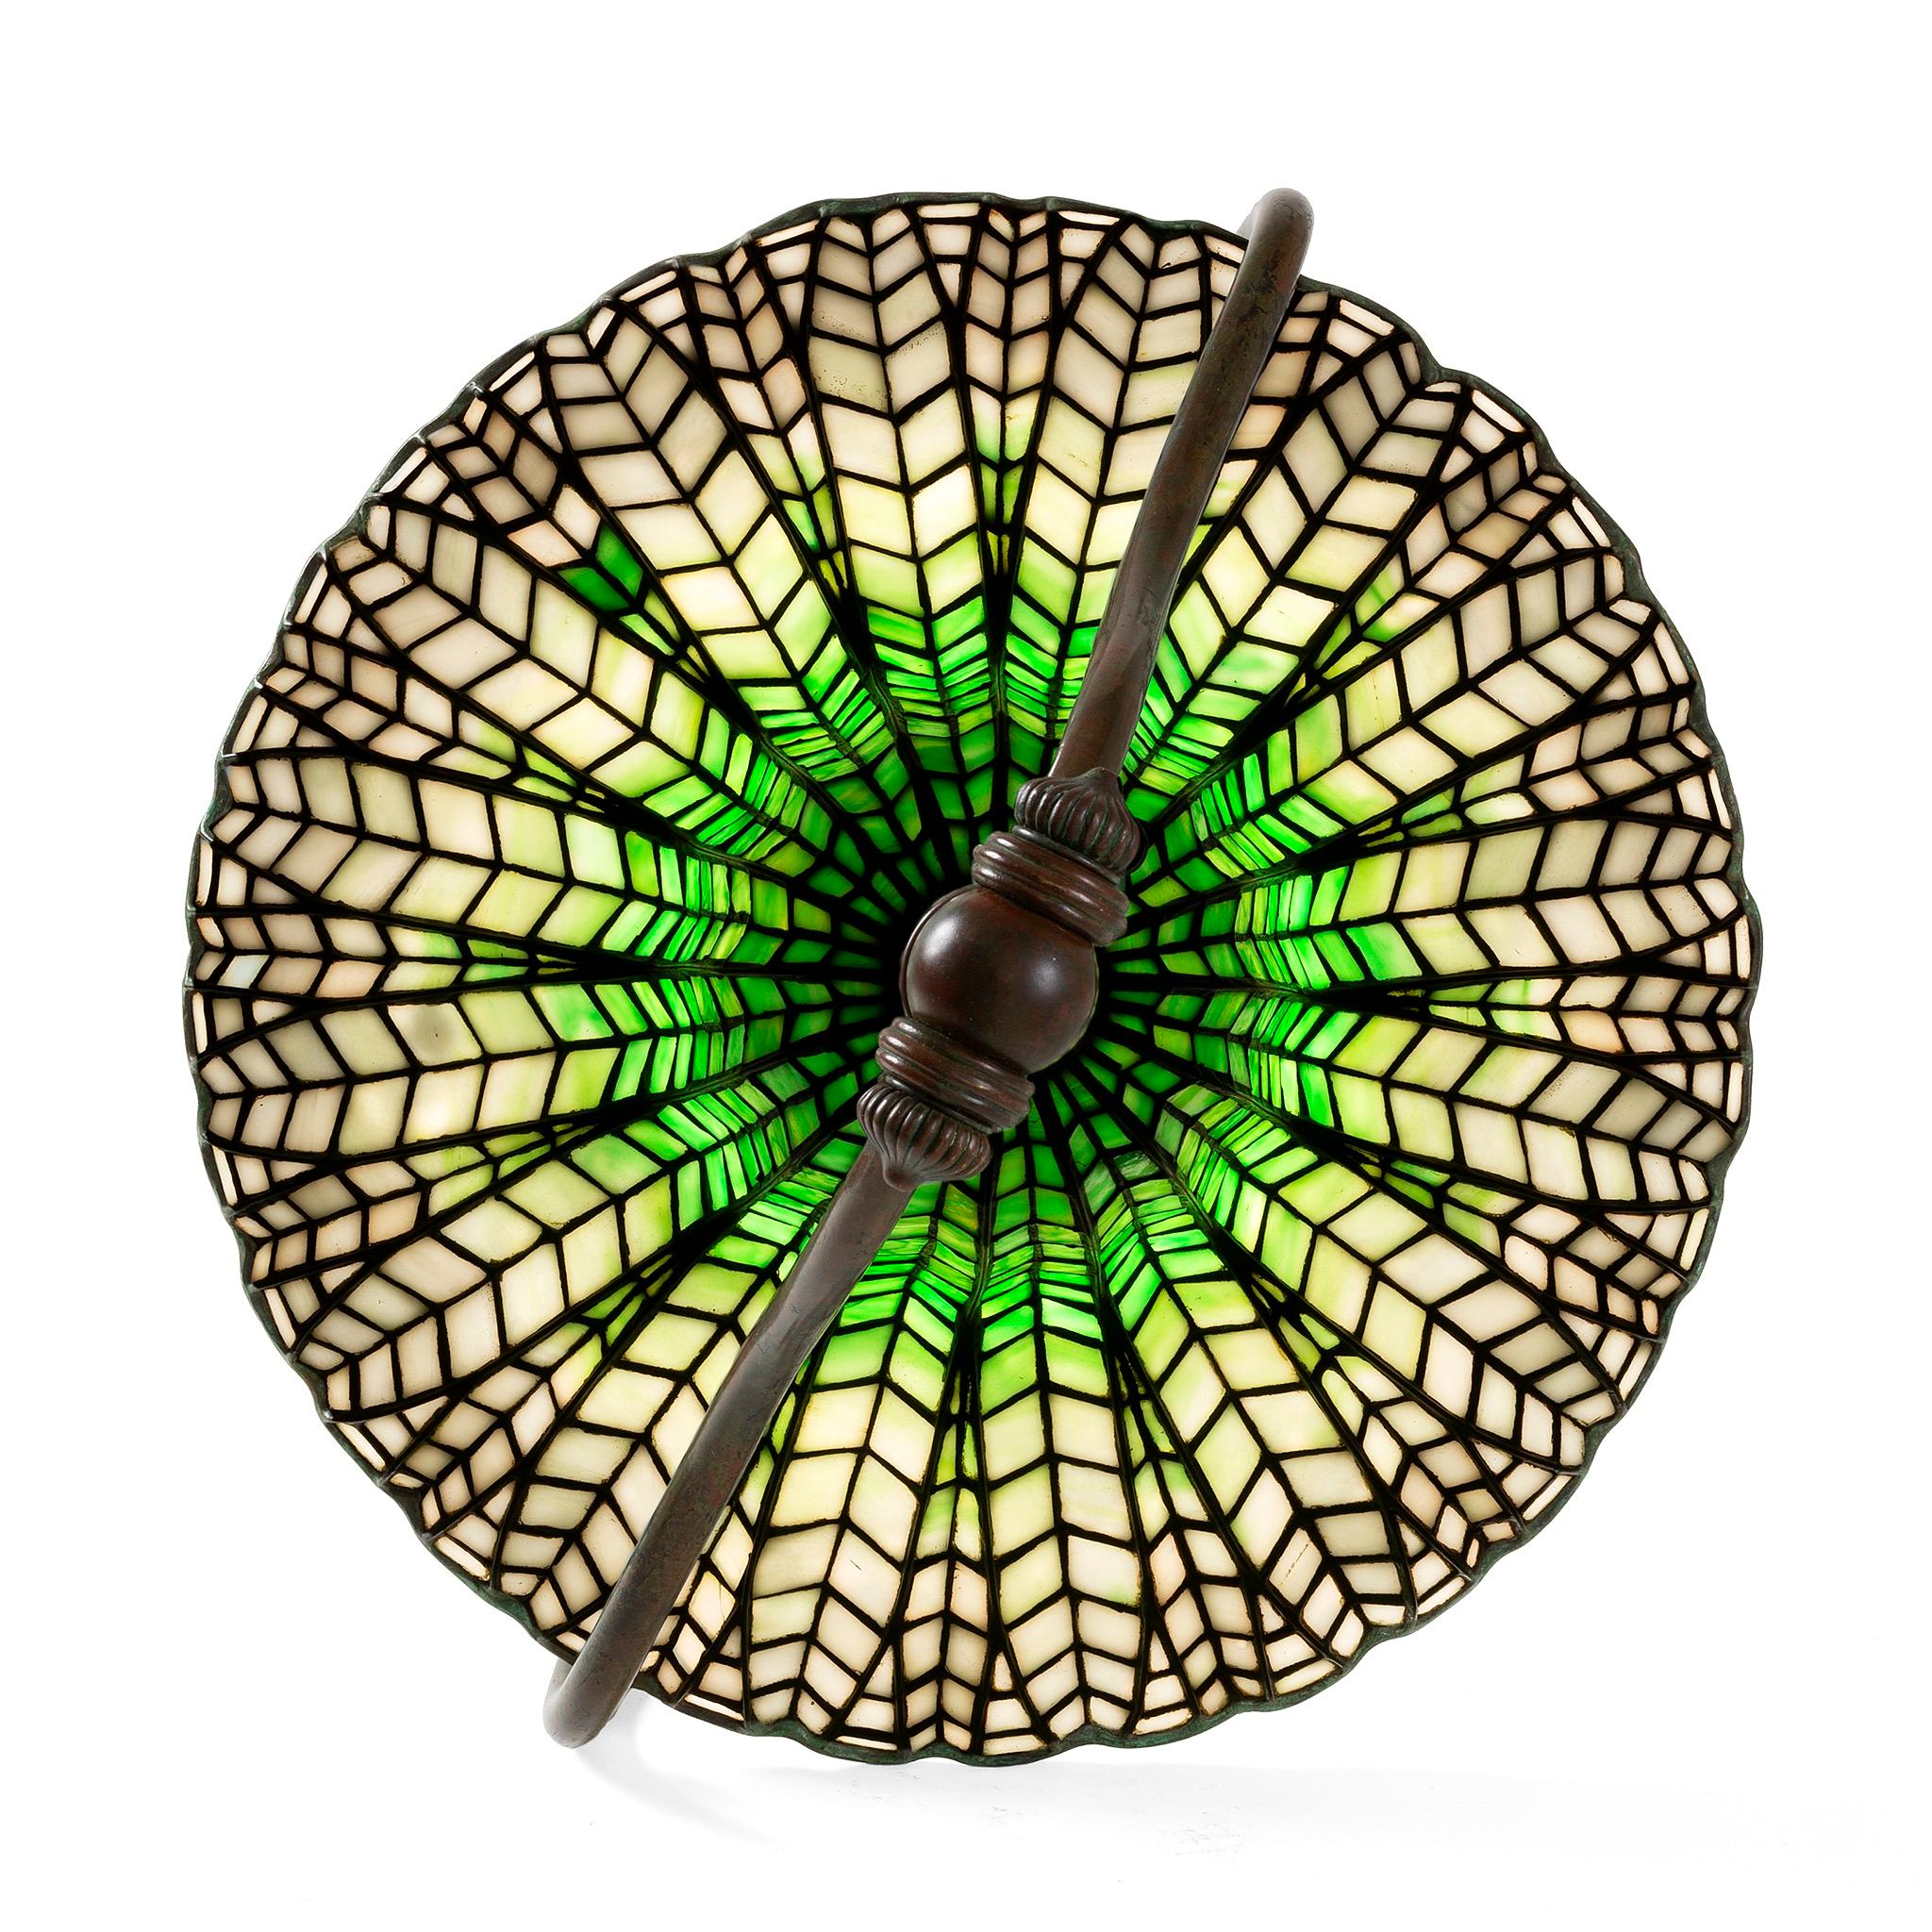 This Tiffany Studios New York glass and bronze “Lotus Bell” table lamp, features a mottled jade green and cream-white leaded glass shade, suspended from a patinated bronze ribbed “Harp” base. The shade bears elaborate veining that required much